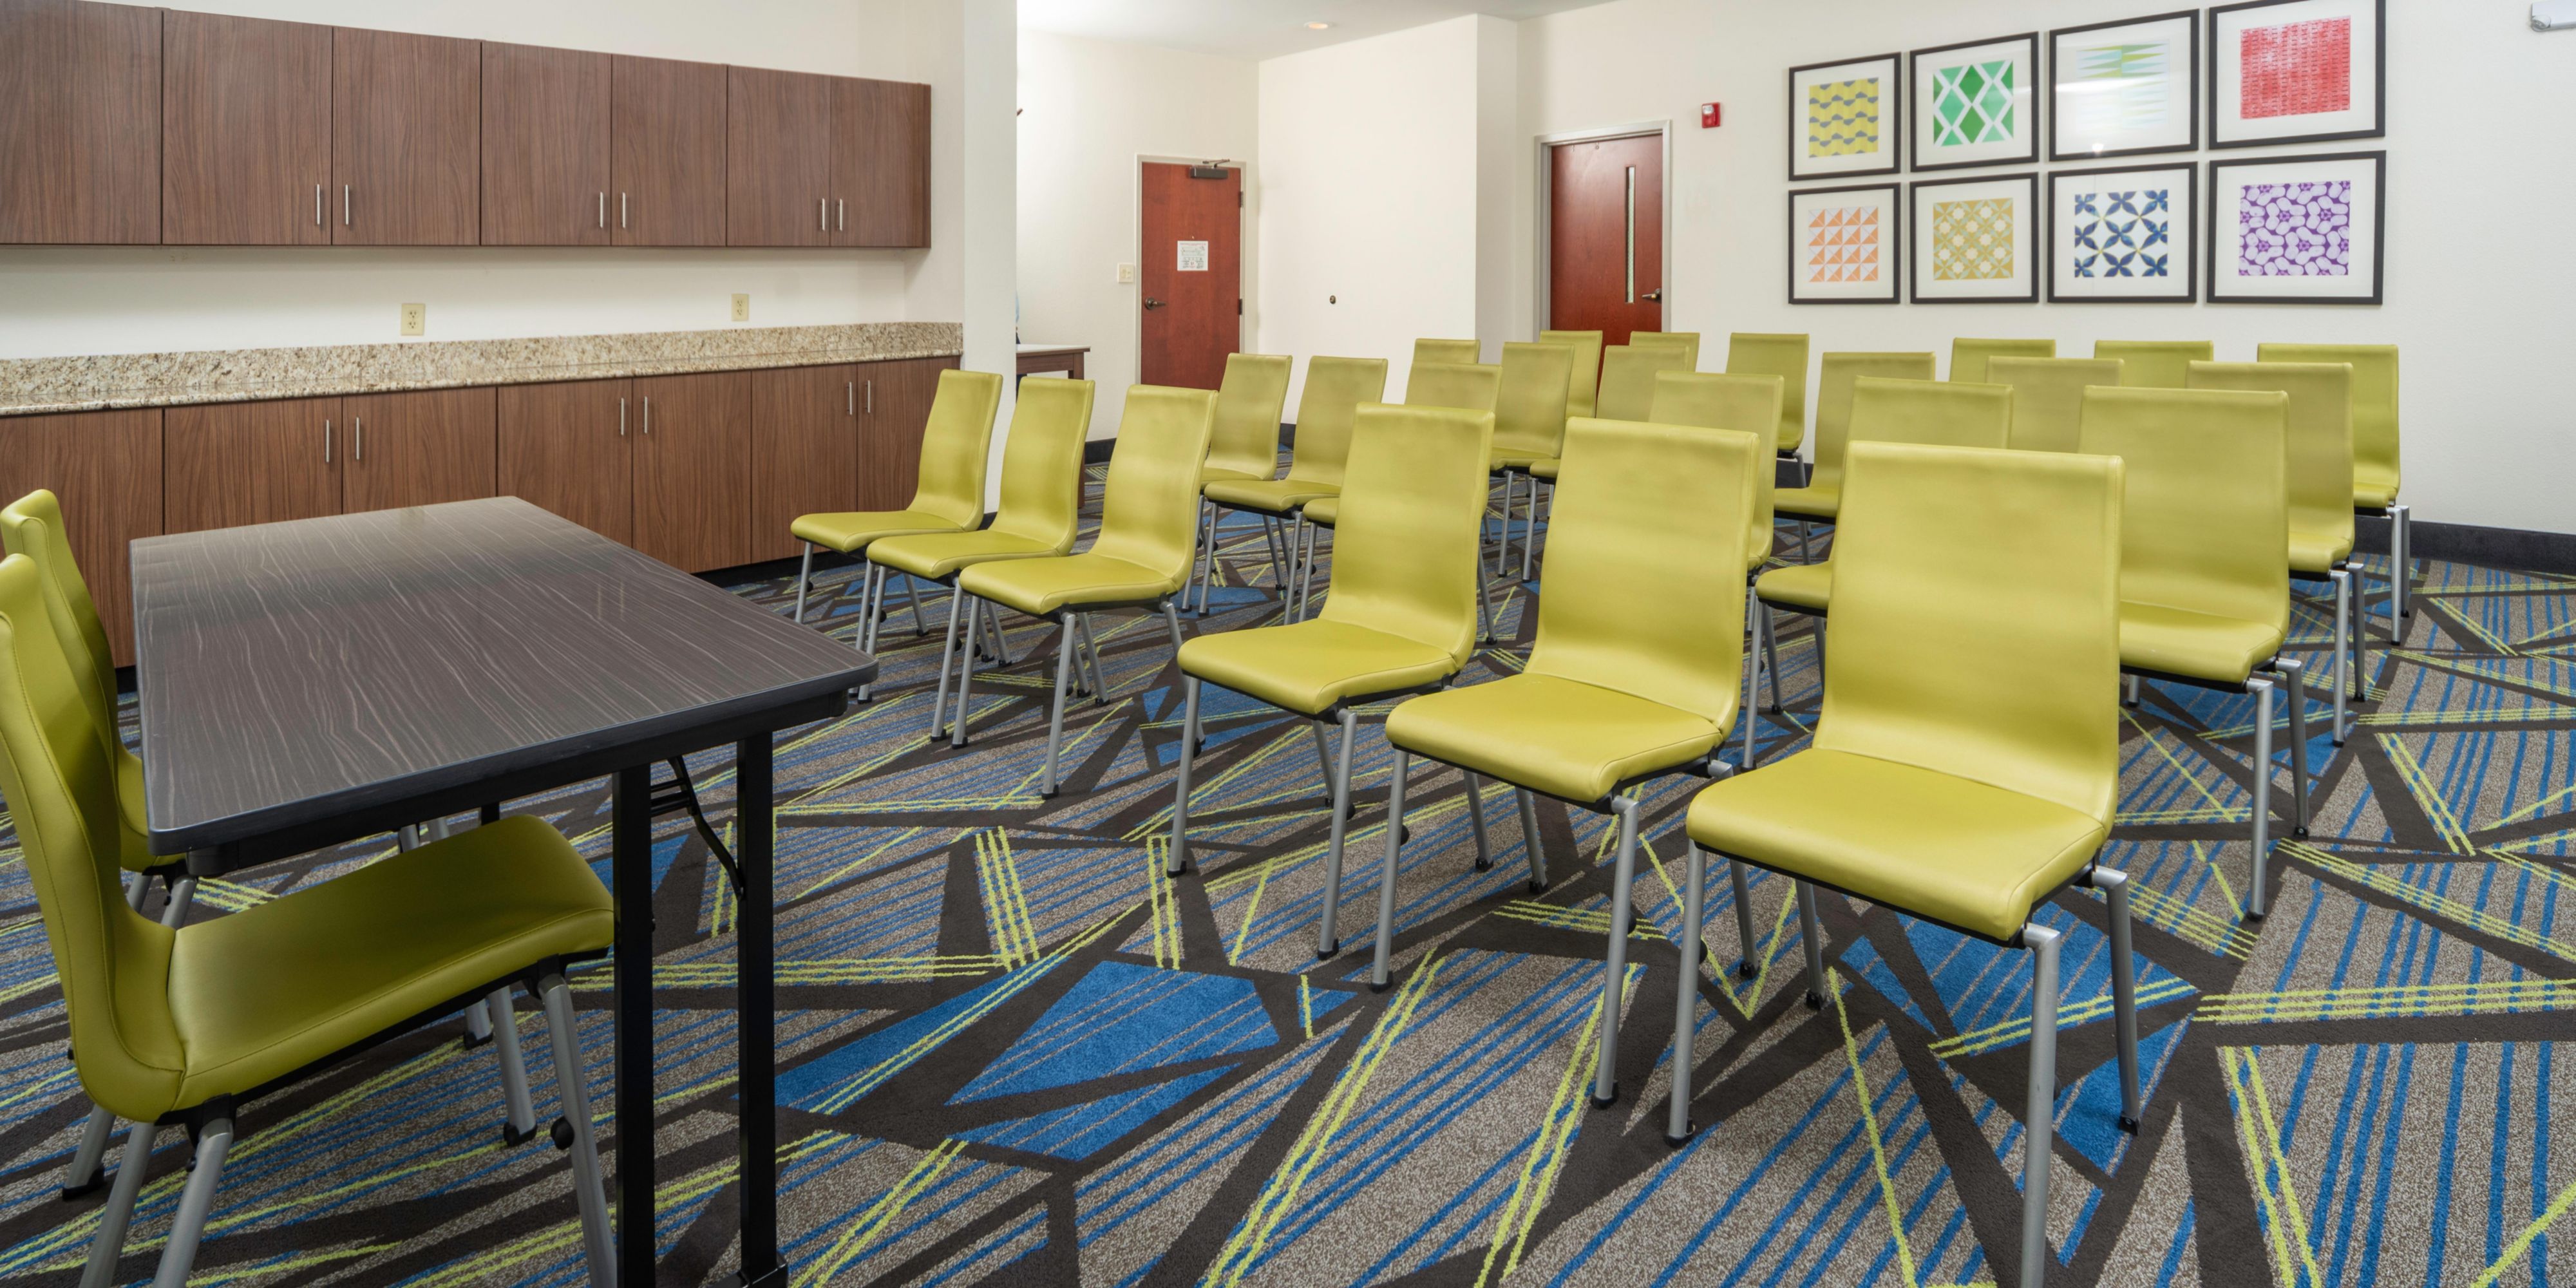 A 300-sq-ft conference room is just the right space for your next meeting, small group gathering, birthday party, church event, etc. 